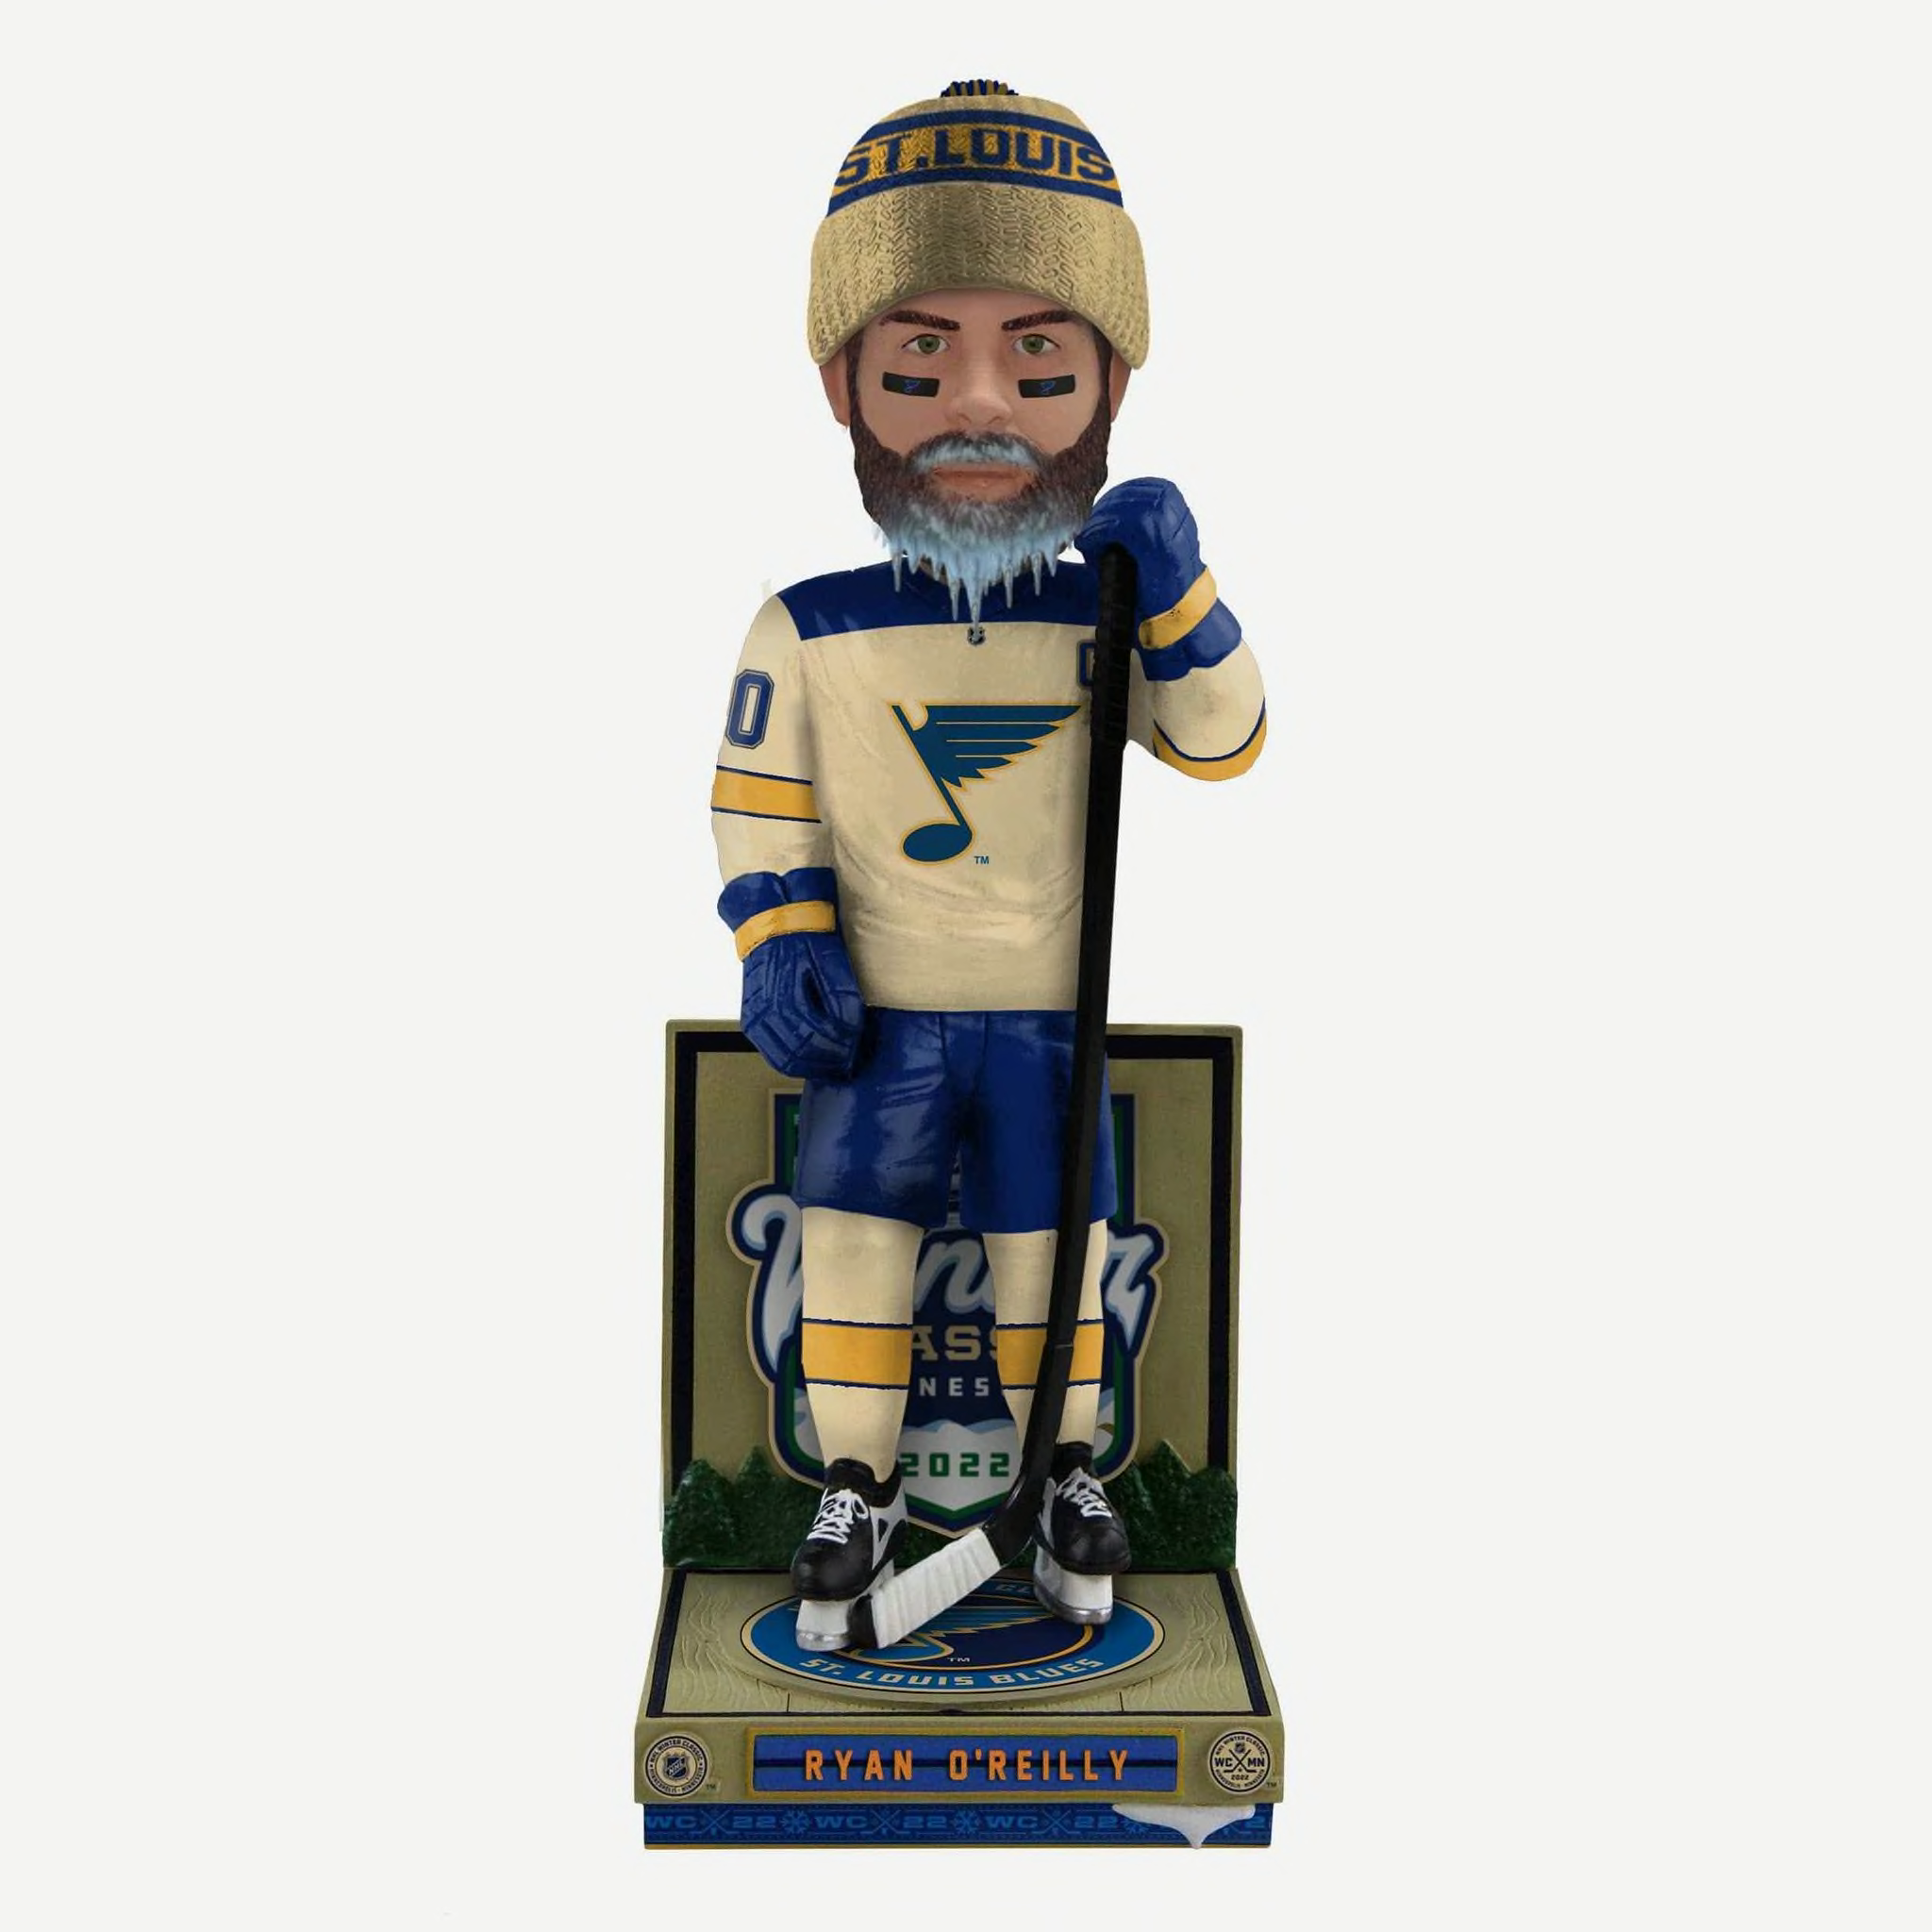 St. Louis Blues fans need this limited-edition Ryan O'Reilly bobblehead